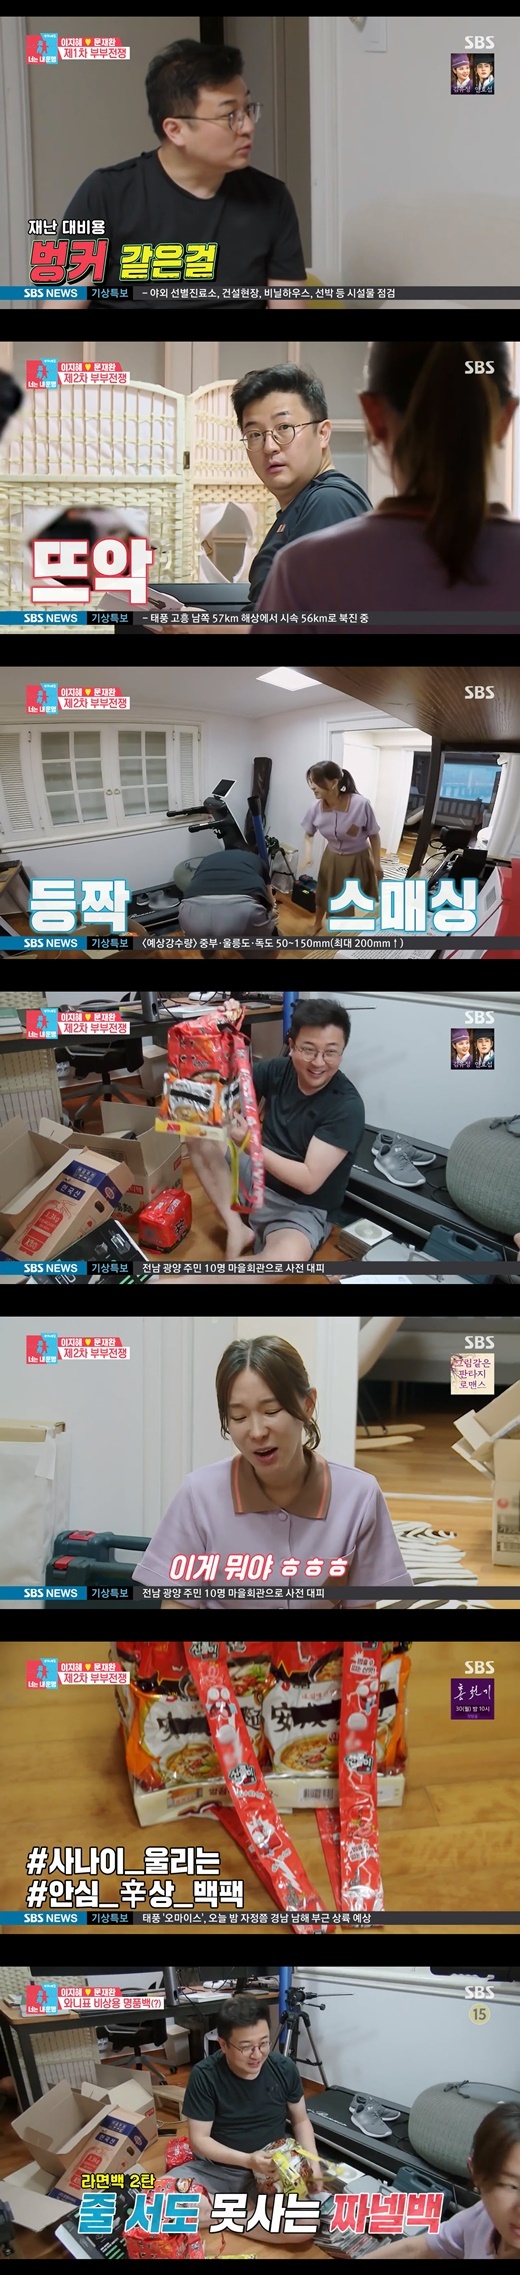 Singer Lee Ji-hye has been in a fight with her husband, tax accountant Moon Jea-wan.On the 23rd SBS Sangsangmong Season 2 - You Are My Destiny, the daily life of Lee Ji-hye - Moon Jea-wan was drawn.On this day, Moon Jea-wan bought a suspicion of Lee Ji-hye by holding a cell phone.Lee Ji-hye was surprised to see him saying, Have you been to the store? He said, I have to keep my head in the east.Moon Jea-wan delivered a four-week-old pool to Lee Ji-hye, saying, You could get a back-to-back head; I told you to be careful this year.Lee Ji-hye told Moon Jea-wan, I am worried about pros. Do you remember? I gave you a gas mask in the early days of Love with Gift. Is it crazy?Why did you give me gas masks? Moon Jea-wan laughed at the fire, saying, In the fire, toxic gas is more dangerous than fire. Lee Ji-hye sighed as she watched the overly concerned Moon Jea-wan.When my husband rides the elevator, he shouts Wait a minute and rides in three seconds, he said. I think a lot about the destruction of humanity or death.I am interested in religion, so I read all the books from Christianity to Buddhism. Moon Jea-wan, in particular, has bought Lee Ji-hyes ire by declaring he would make a bunker inside the house.To him, Lee Ji-hye, who is going to fill the study with relief supplies, was absurd, saying, Do you think Ill allow it? Moon Jea-wan said, Do you need permission? Its my room.Its to protect the family, he said.Lee Ji-hye left the room shouting, Im tired to hear your brothers logic, stop being useless.But Moon Jea-wan quietly began to organize his study, and Lee Ji-hye, who witnessed it, was angry, saying, What are you doing?Moon Jea-wan pulled Lee Ji-hyes rascals in a winkless, charming look.His Hidden Tem, which led to a couple fight as a reconciliation, is Ramen Bag.In the end, Lee Ji-hye surrendered to Moon Jea-wan, who prepared a mini-customized evacuation bag for his daughter Tarry, and finished the fight with a warm appearance.